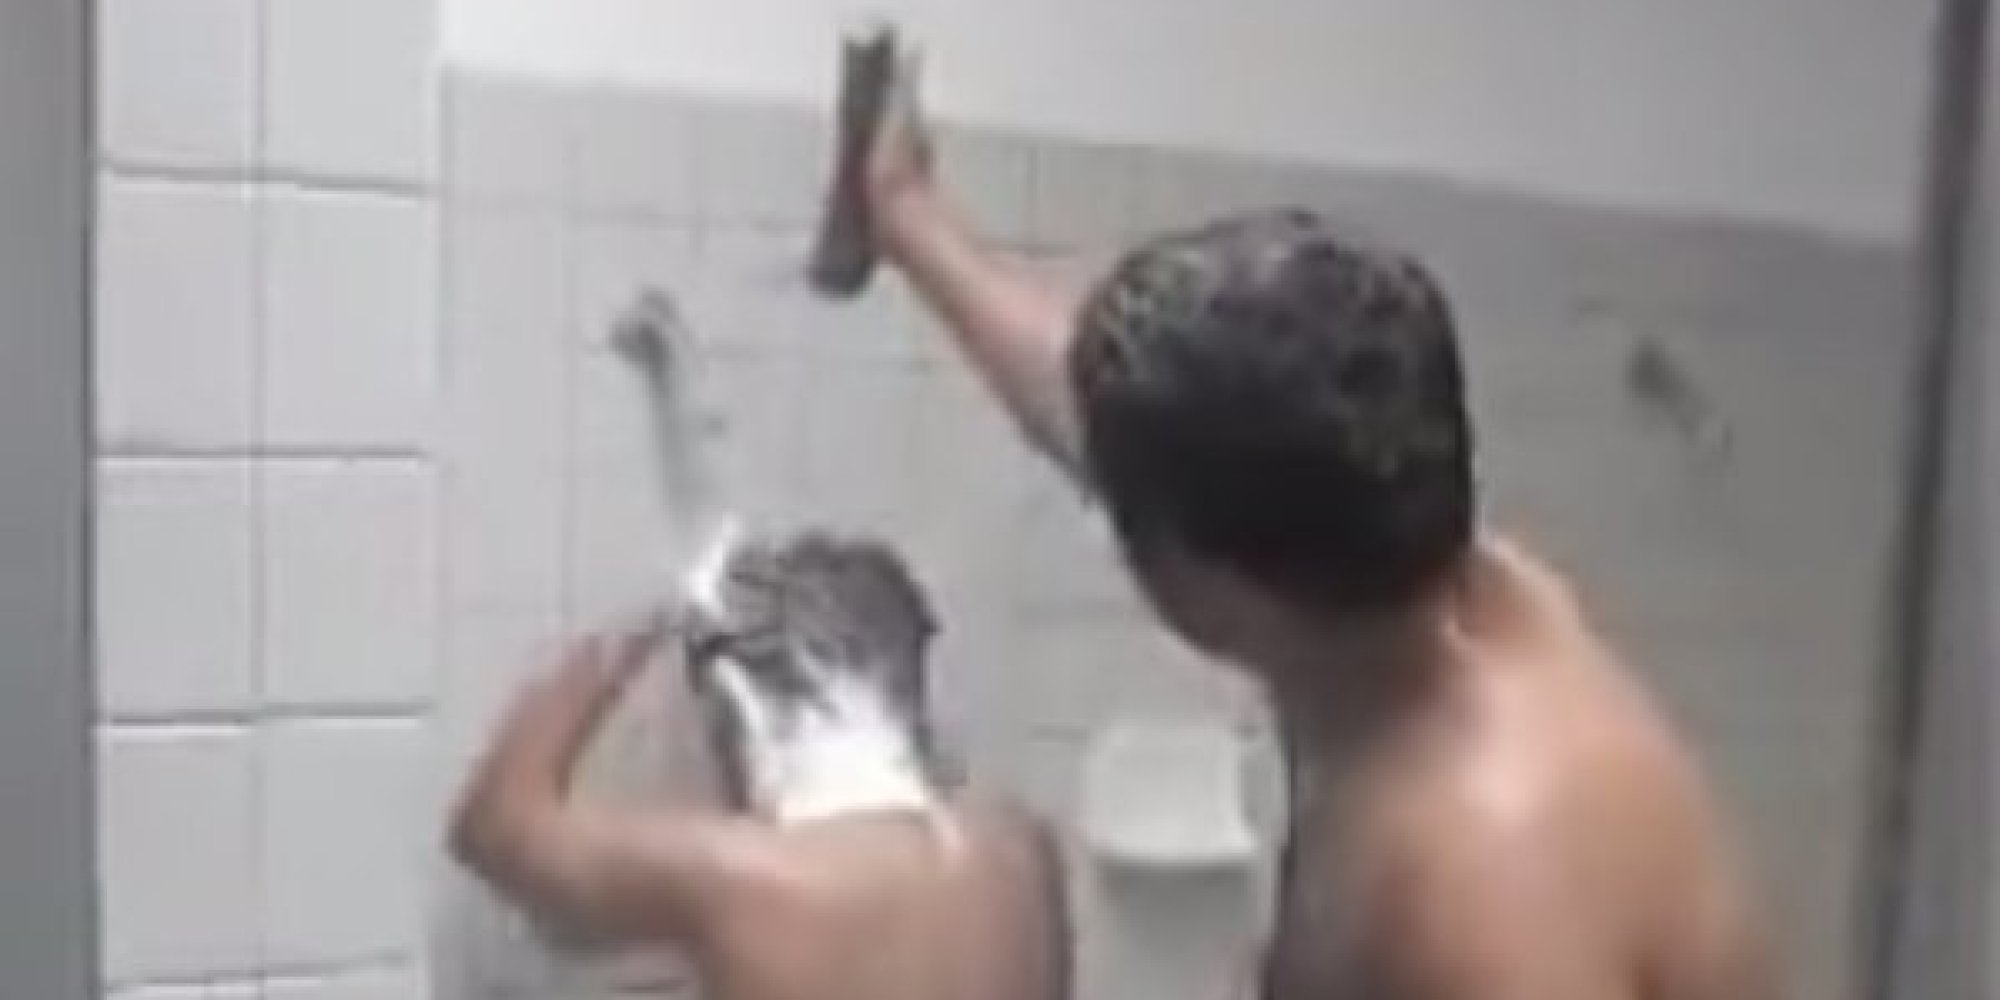 How To Prank A Friend In The Shower VIDEO